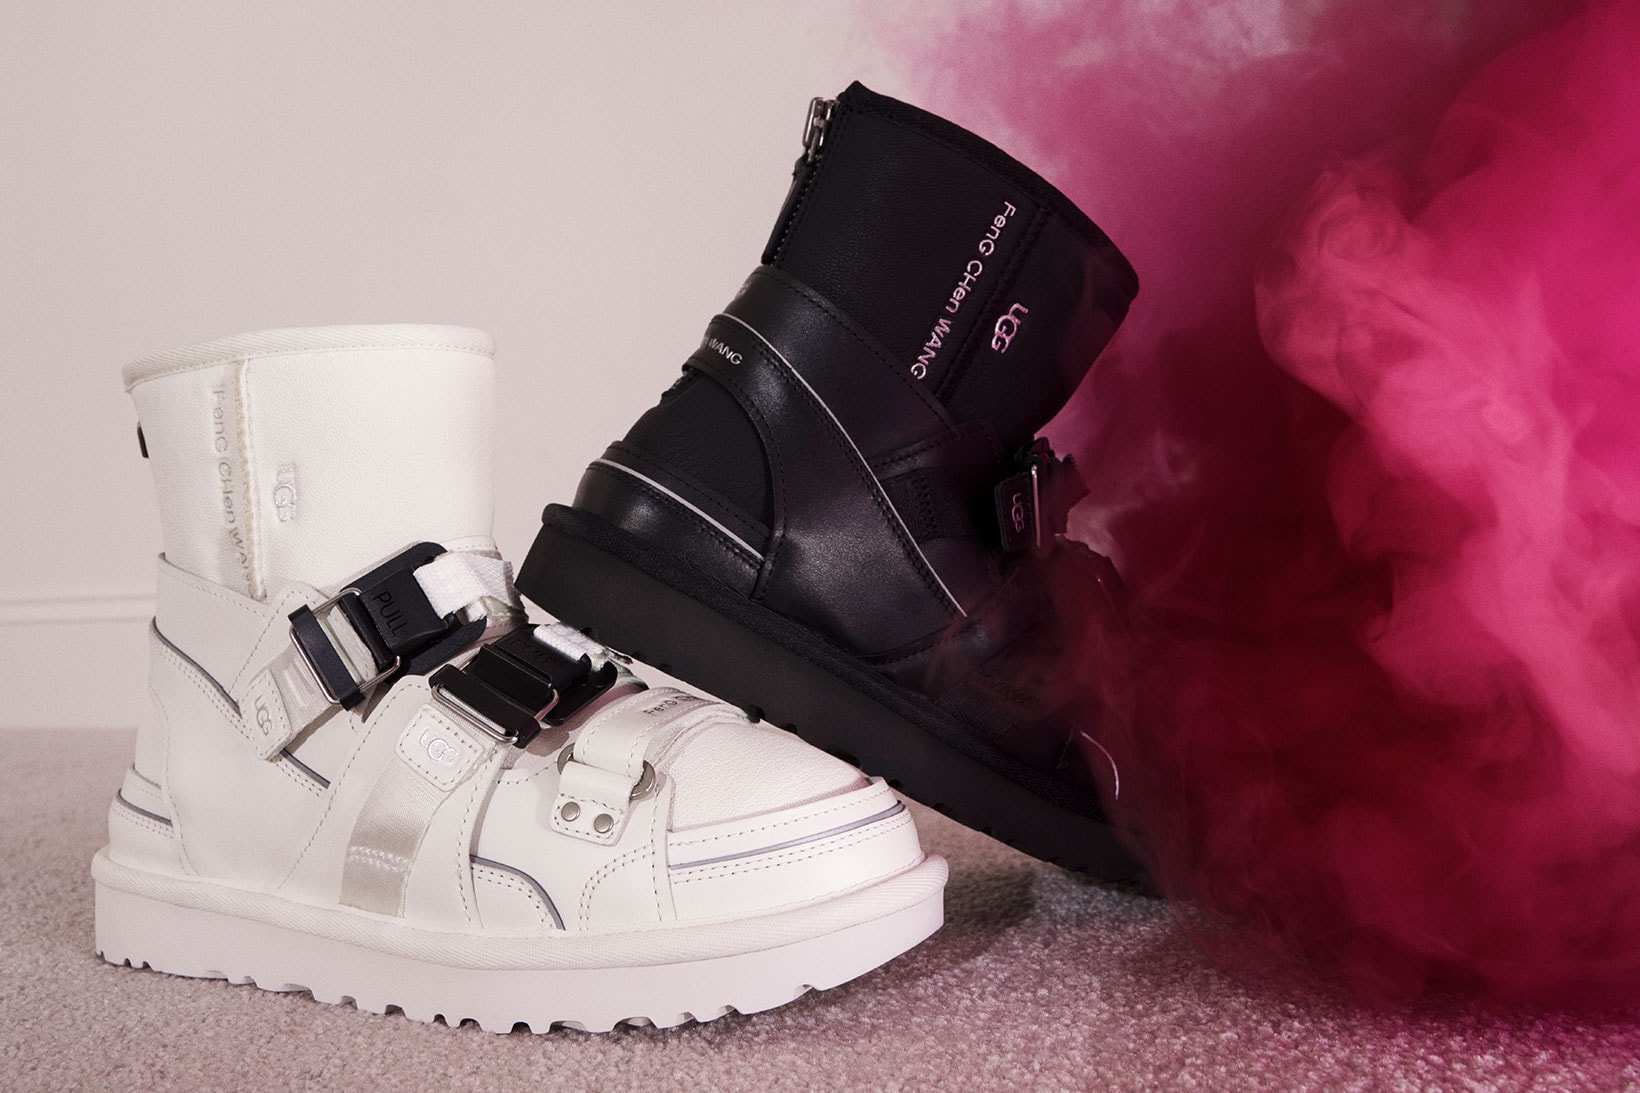 UGG Feng Chen Wang Collaboration FW21 Classic Boots White Black